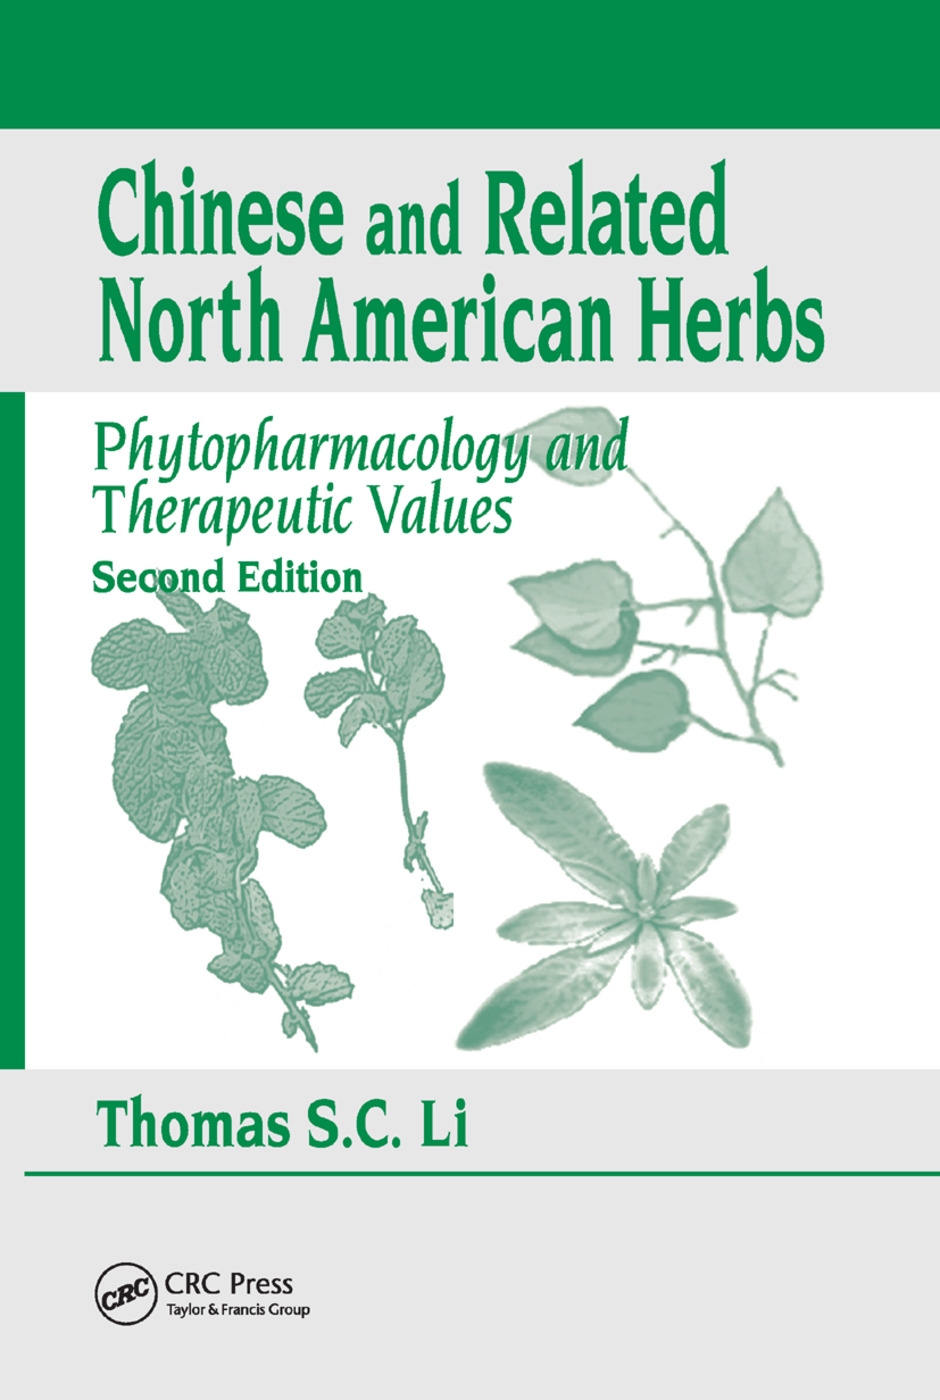 Chinese & Related North American Herbs: Phytopharmacology & Therapeutic Values, Second Edition